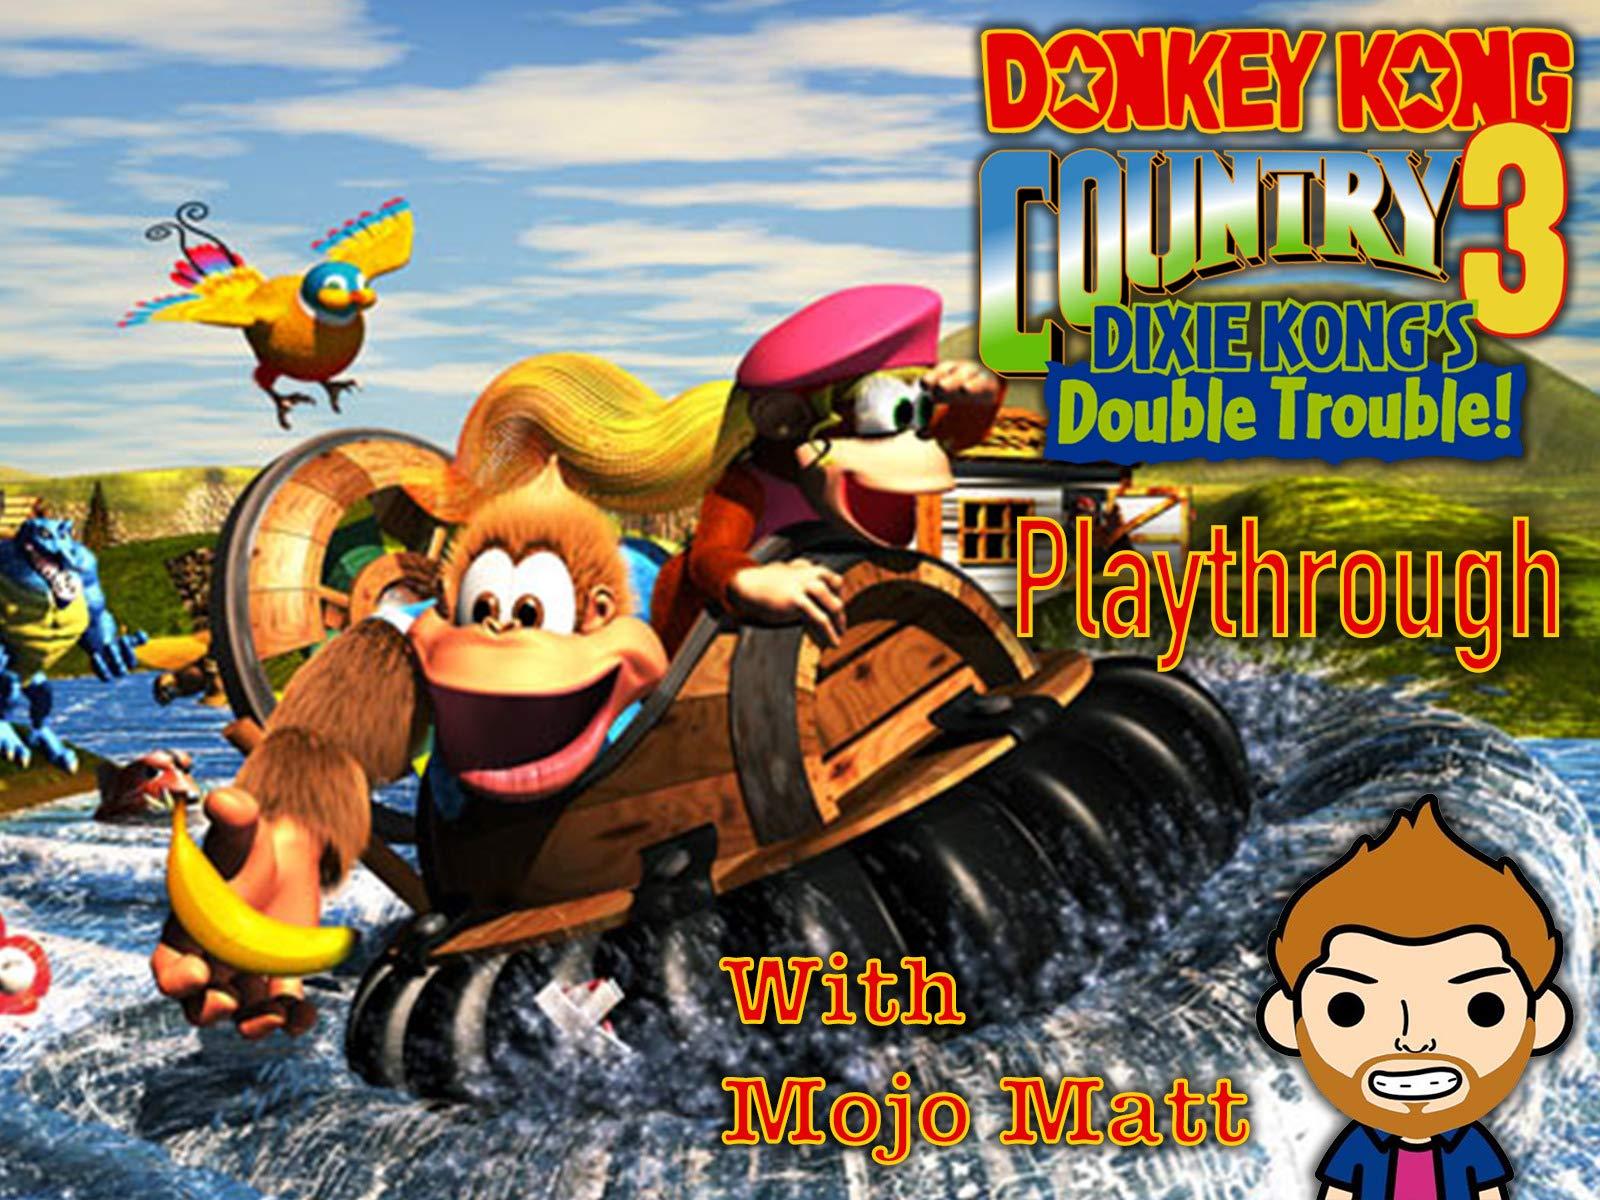 Donkey Kong Country 3 Dixie Kong's Double Trouble